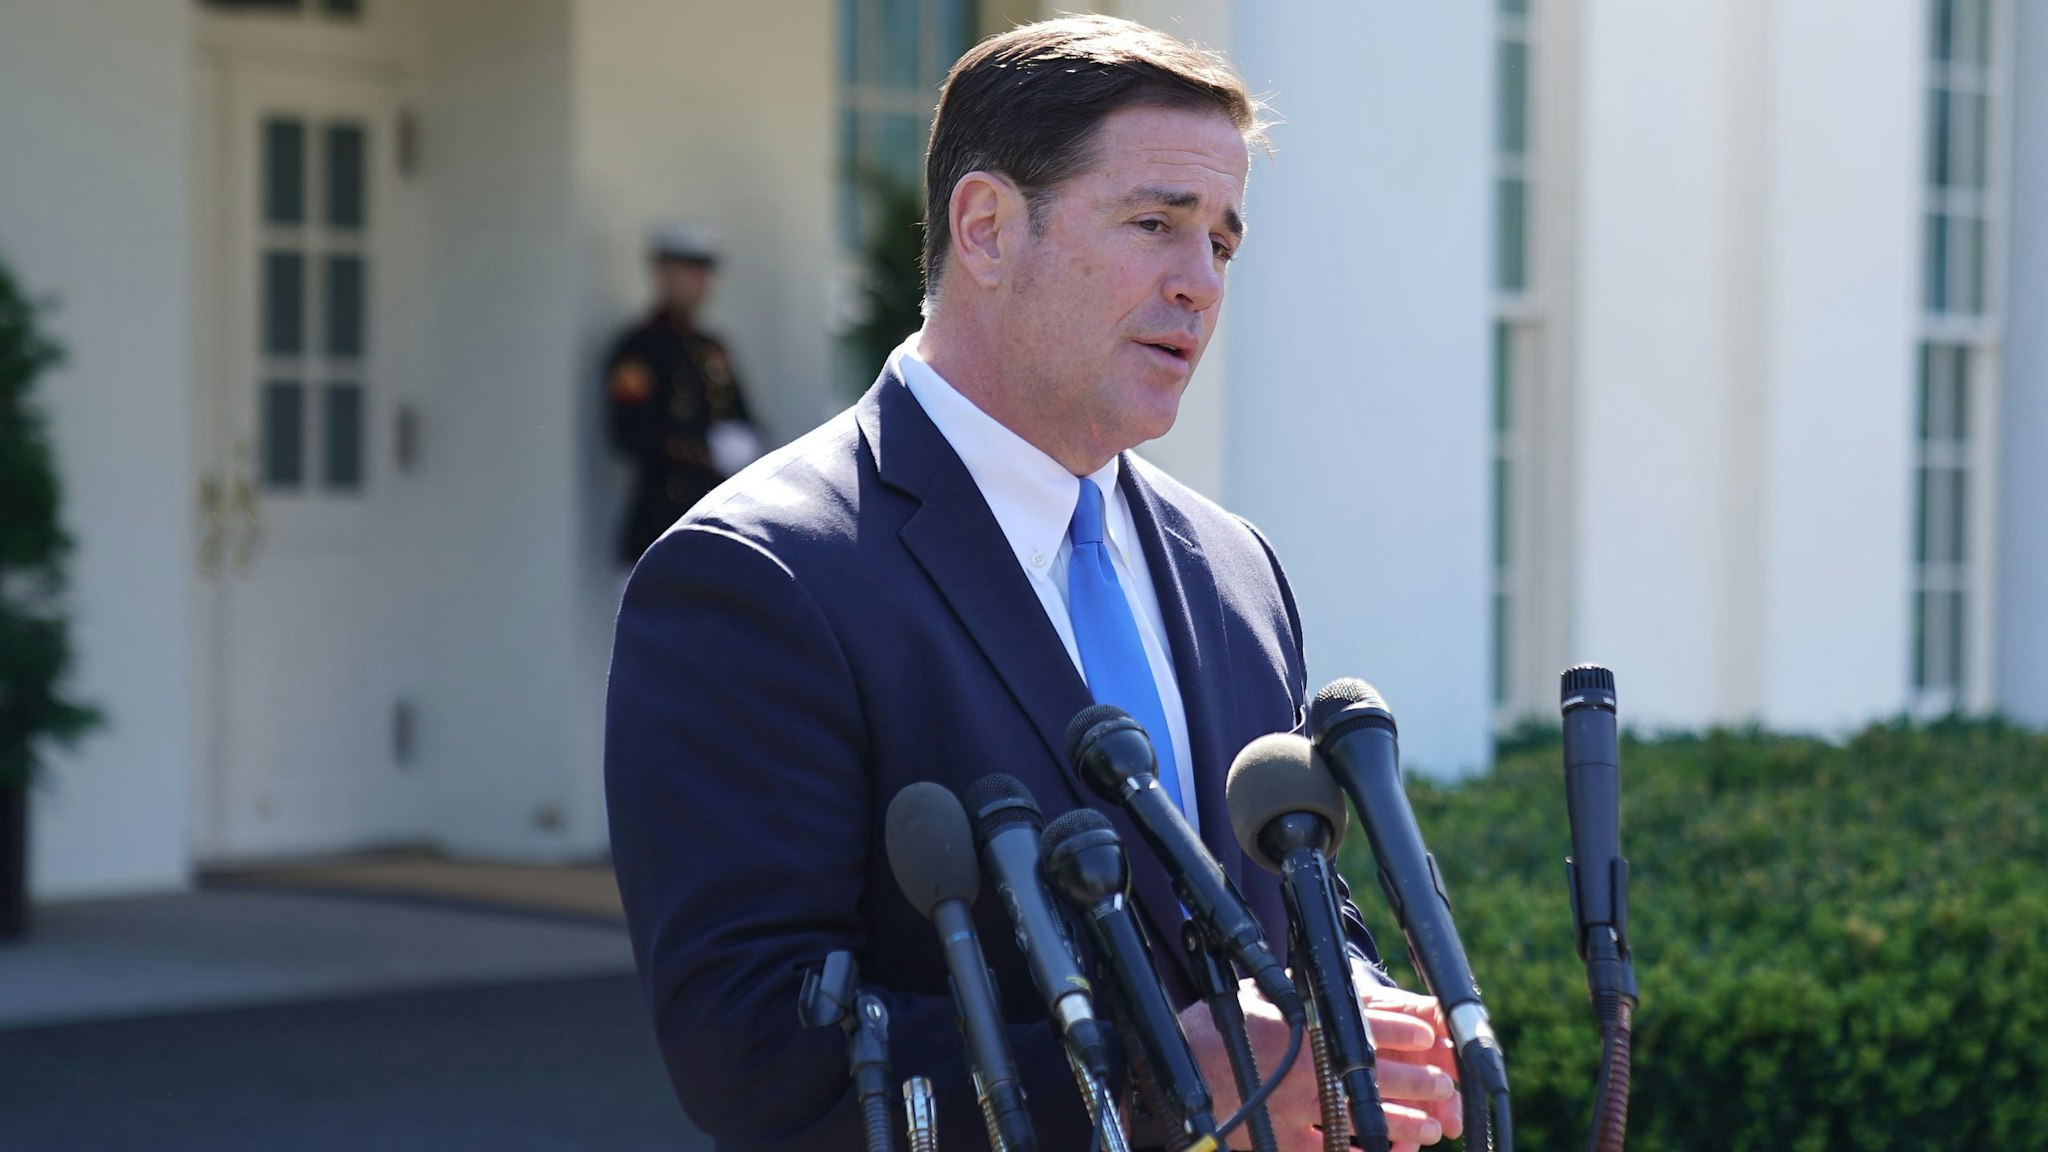 WASHINGTON, DC - APRIL 03: Arizona Governor Doug Ducey talks to reporters after meeting with President Donald Trump at the White House April 03, 2019 in Washington, DC. Ducey said he spoke with Trump about security along the Arizona-Mexico border and called on Congress to "stop playing political games and act."